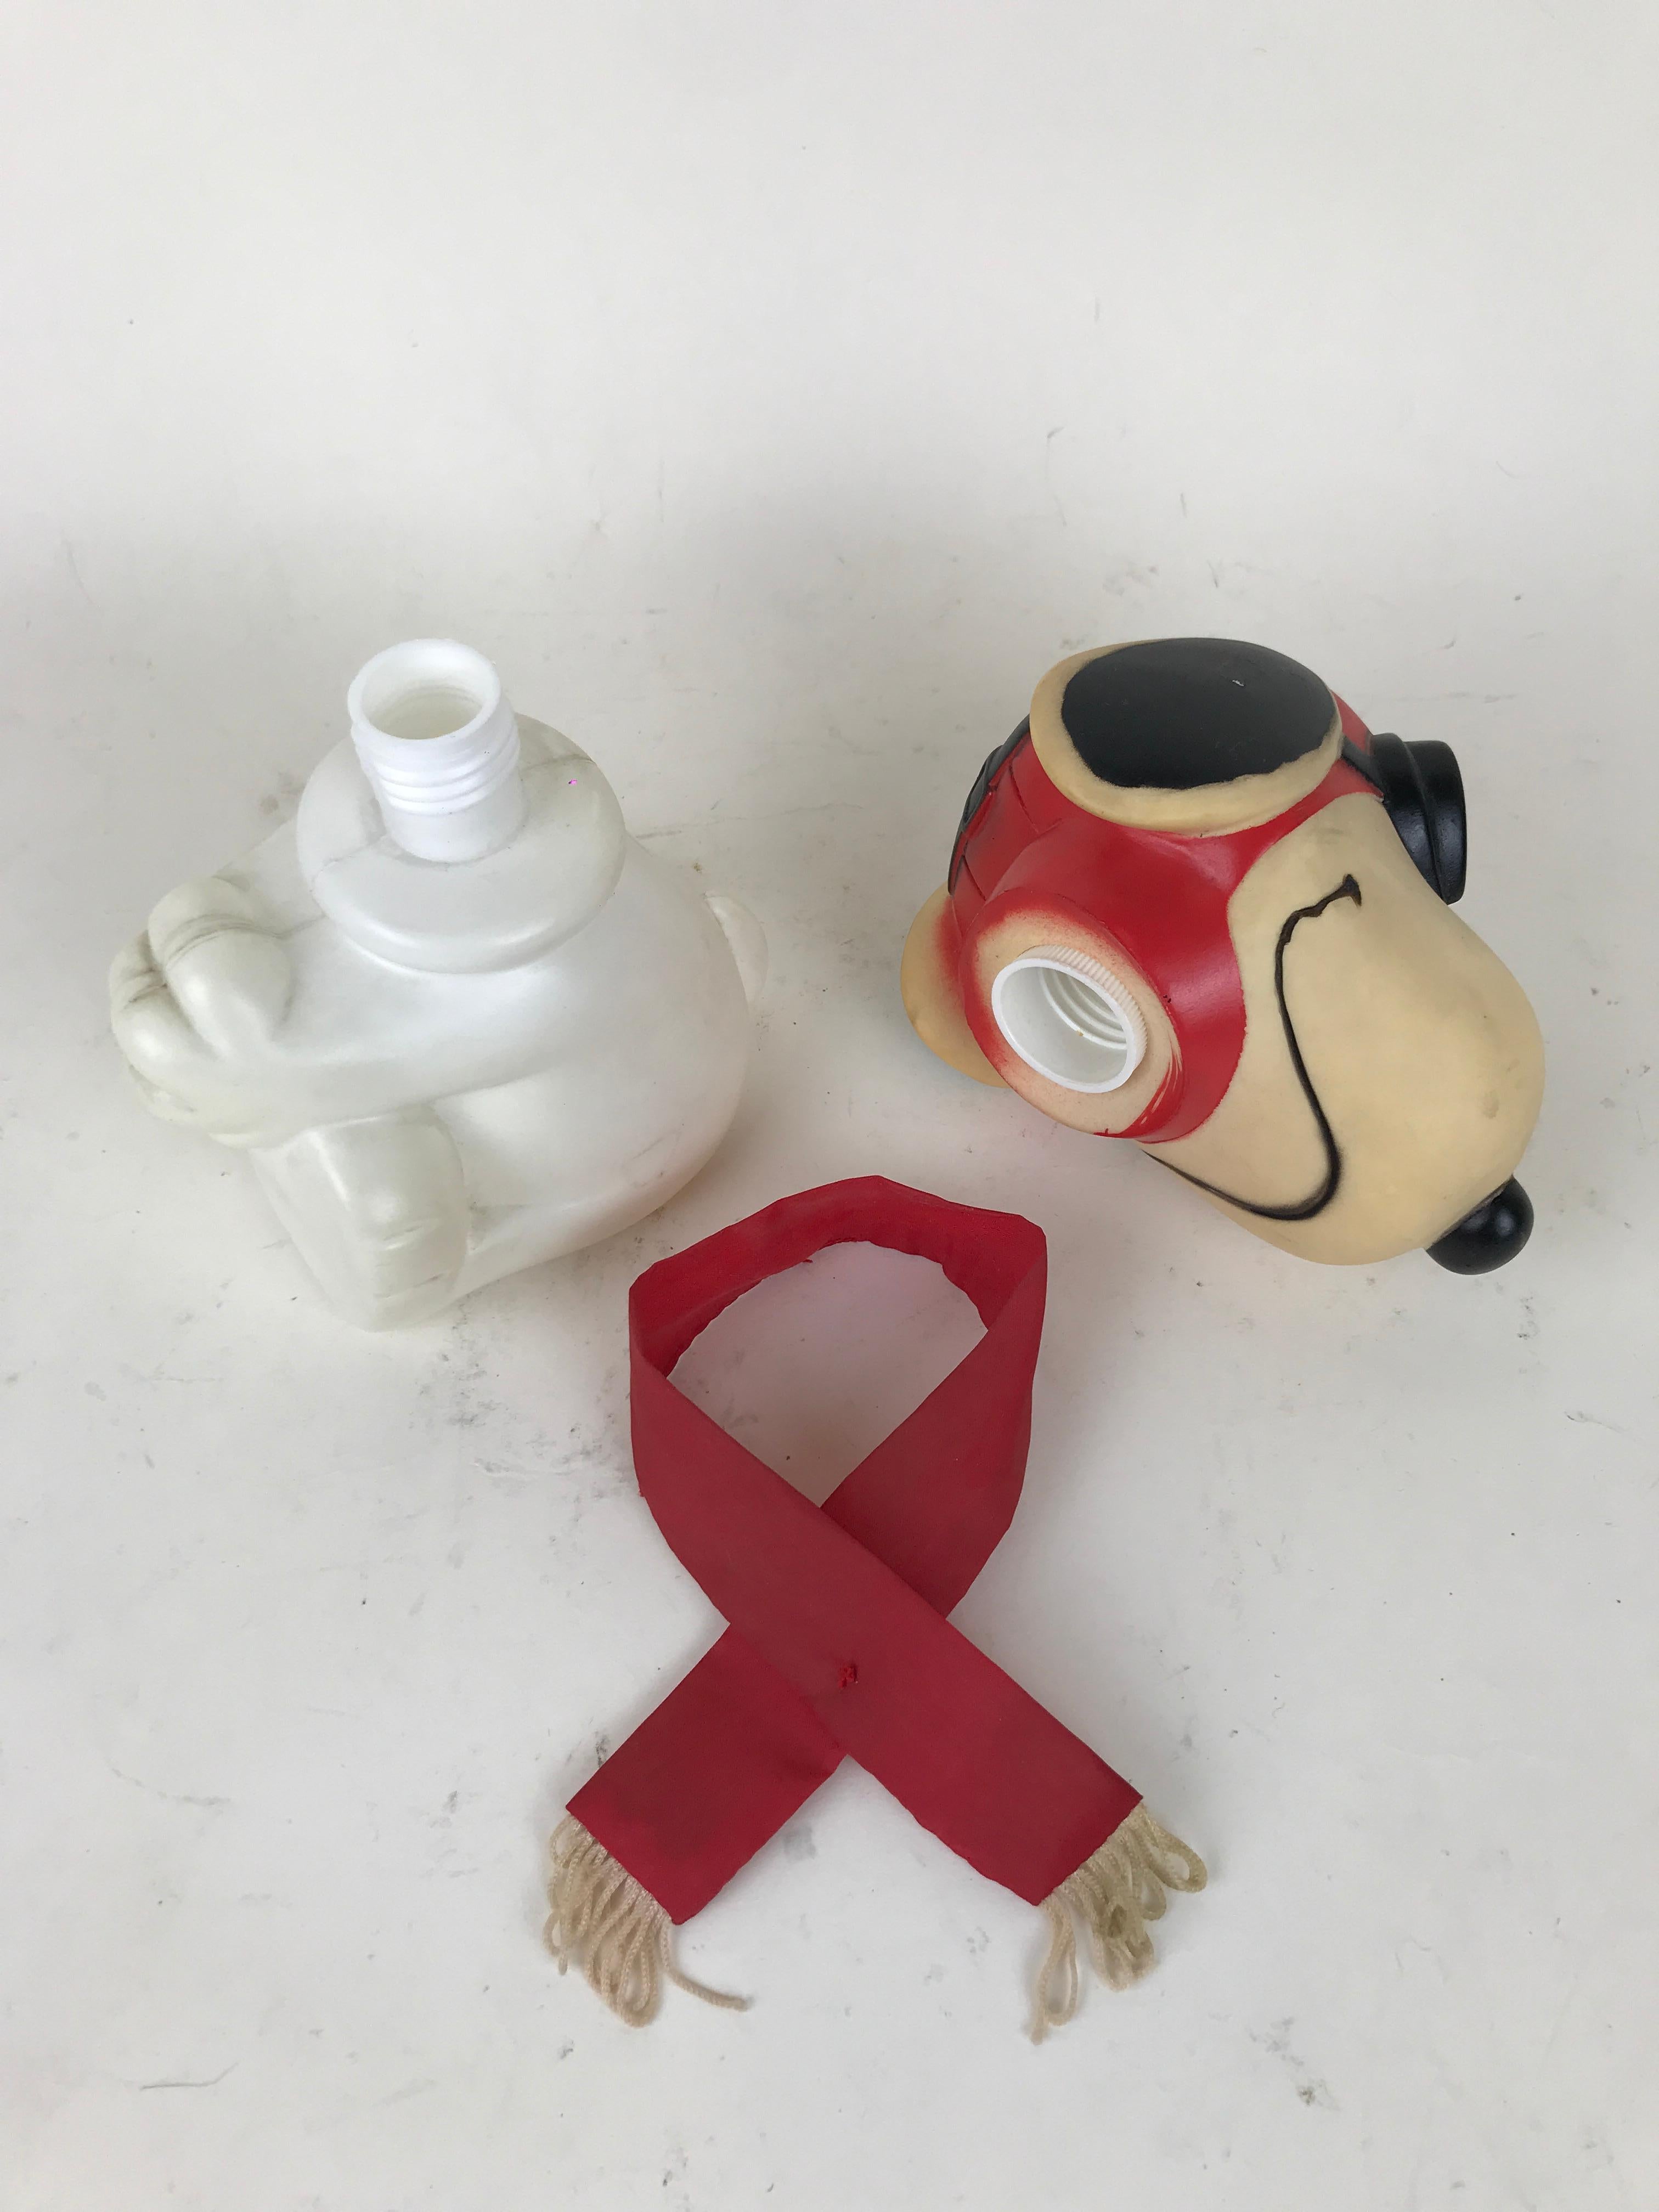 1960s Vintage Plastic Model of Snoopy Wearing Scarf and Heart Shaped Googles 1